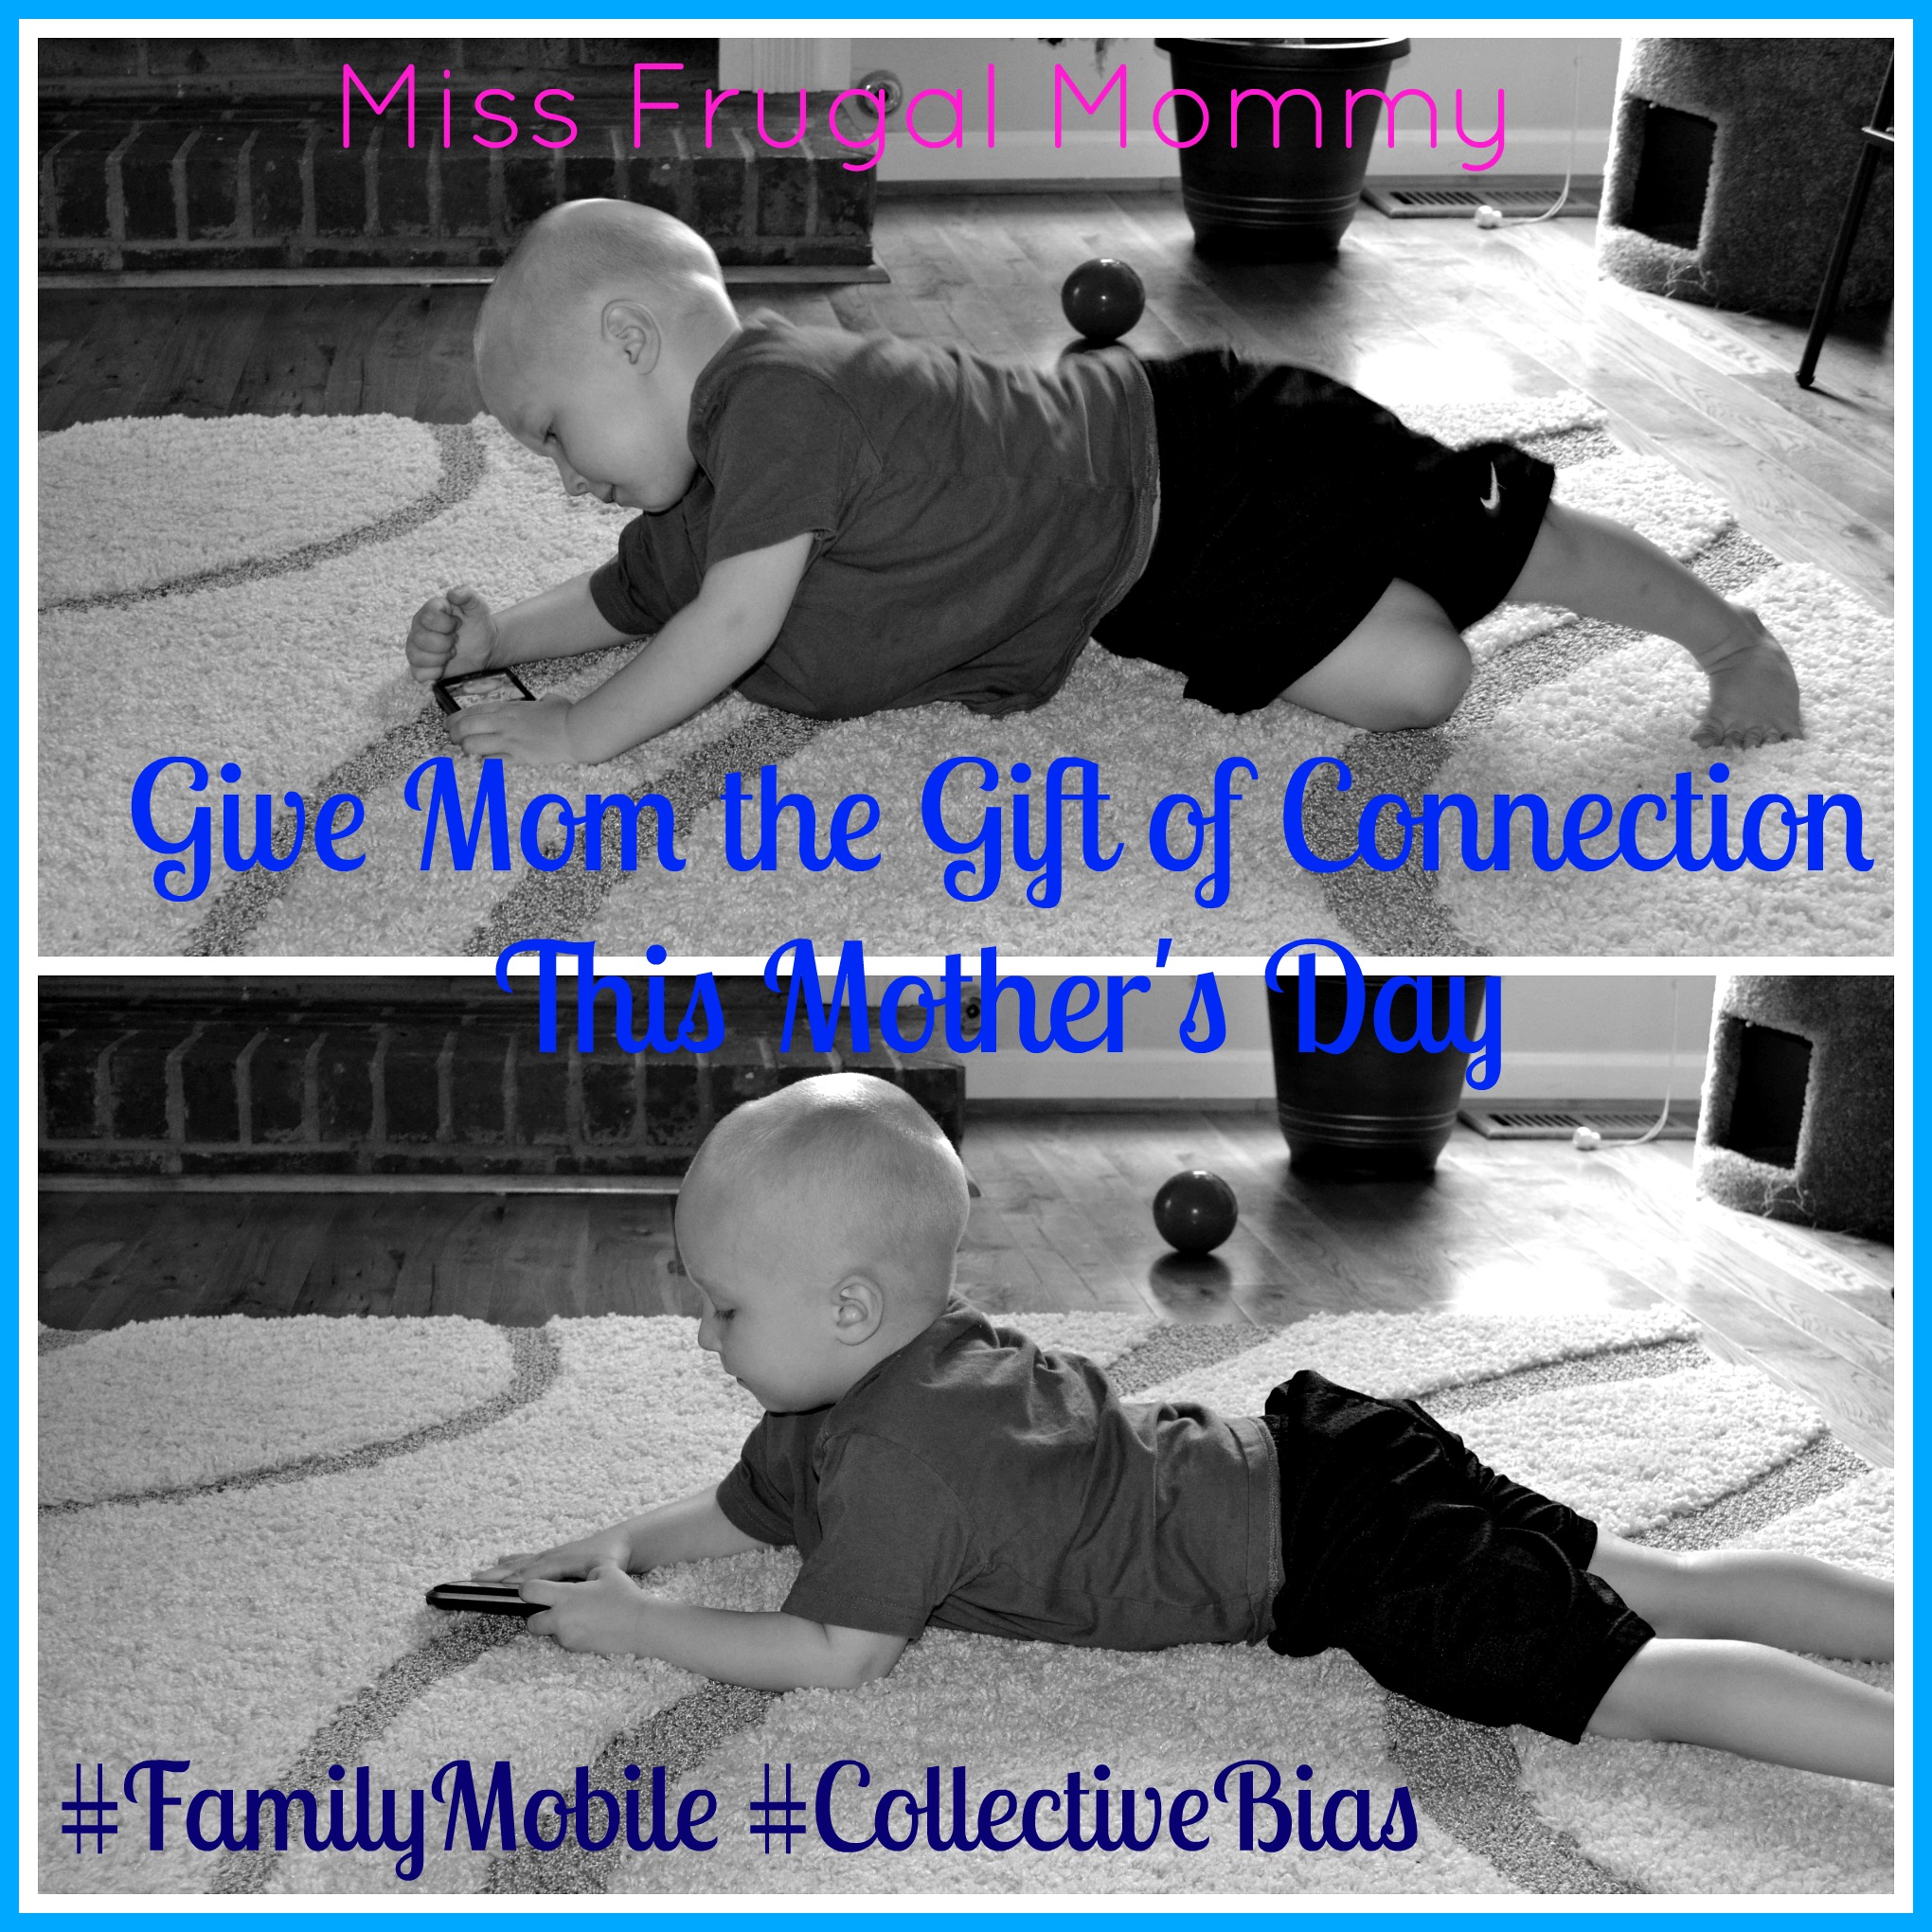 Give Mom the Gift of Connection This Mother's Day #FamilyMobile #CollectiveBias #shophttp://missfrugalmommy.com/wp-content/uploads/2014/04/mobile6.jpg